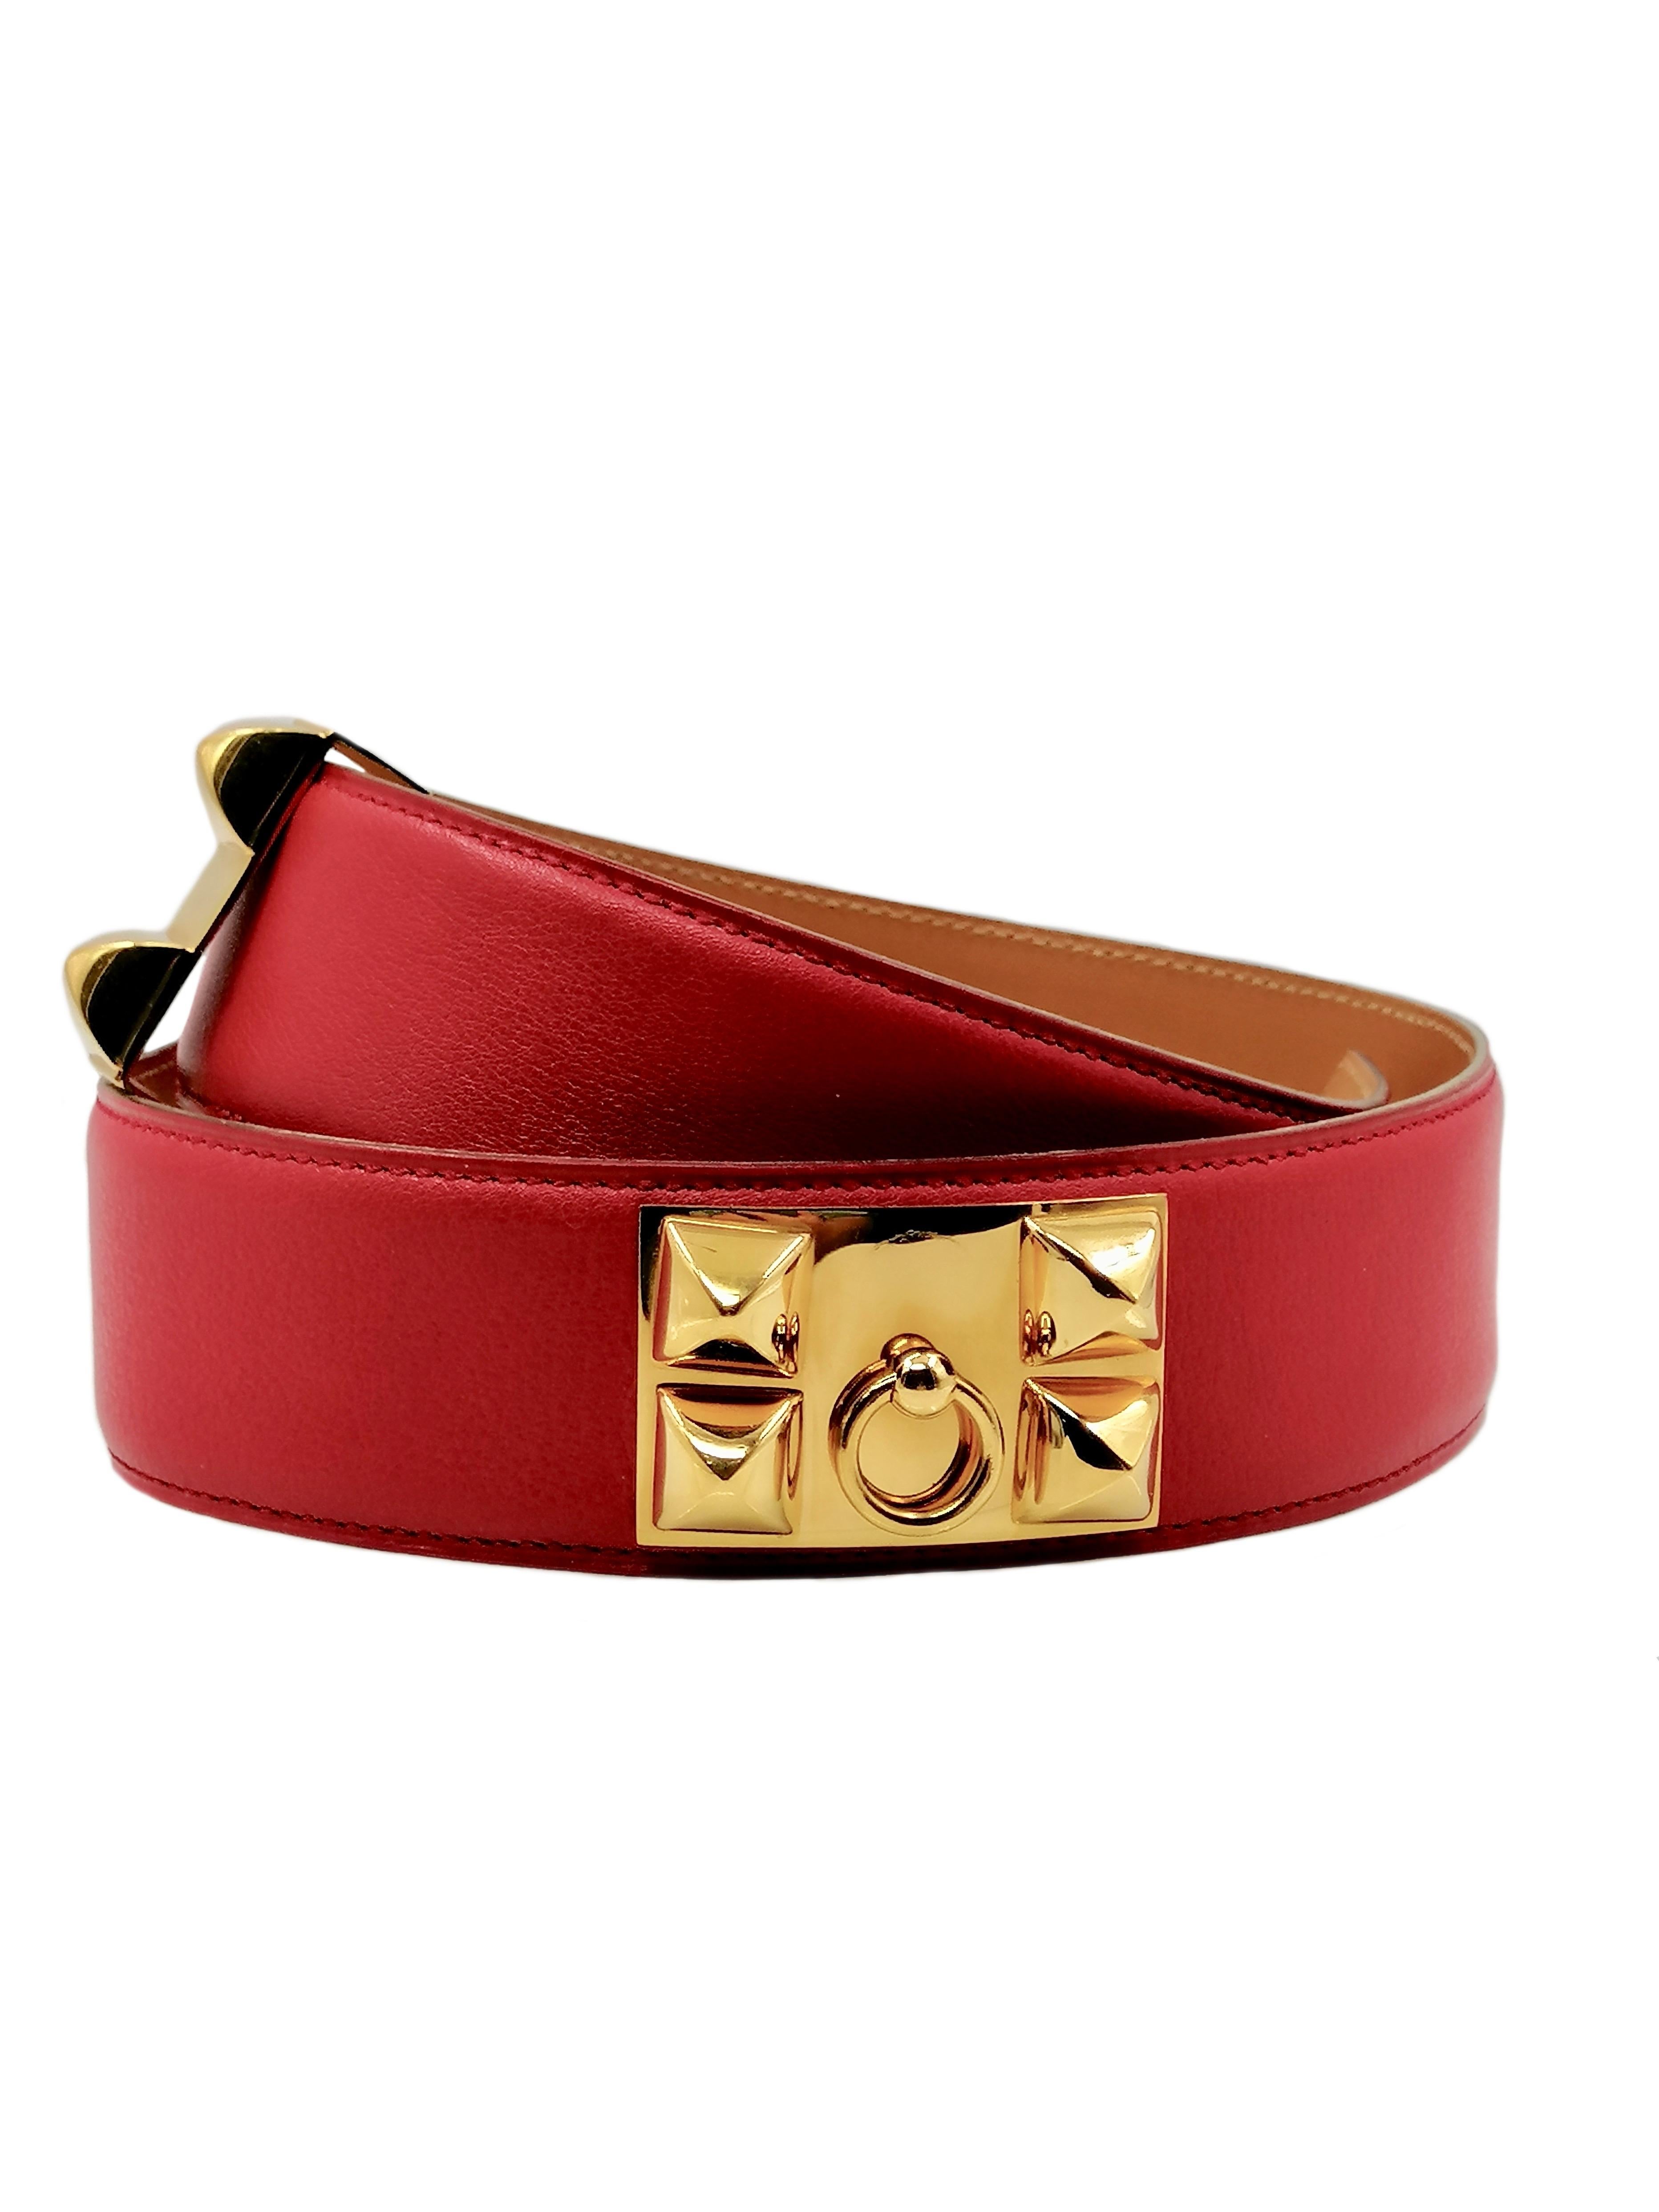 HERMÈS Collier de Chien red leather belt
Vintage - year 1996  Z in circle
Red leather - Golden metal 
Some scratches on the buckle
 Length cm. 70
Height  cm.   4
Very good condition
